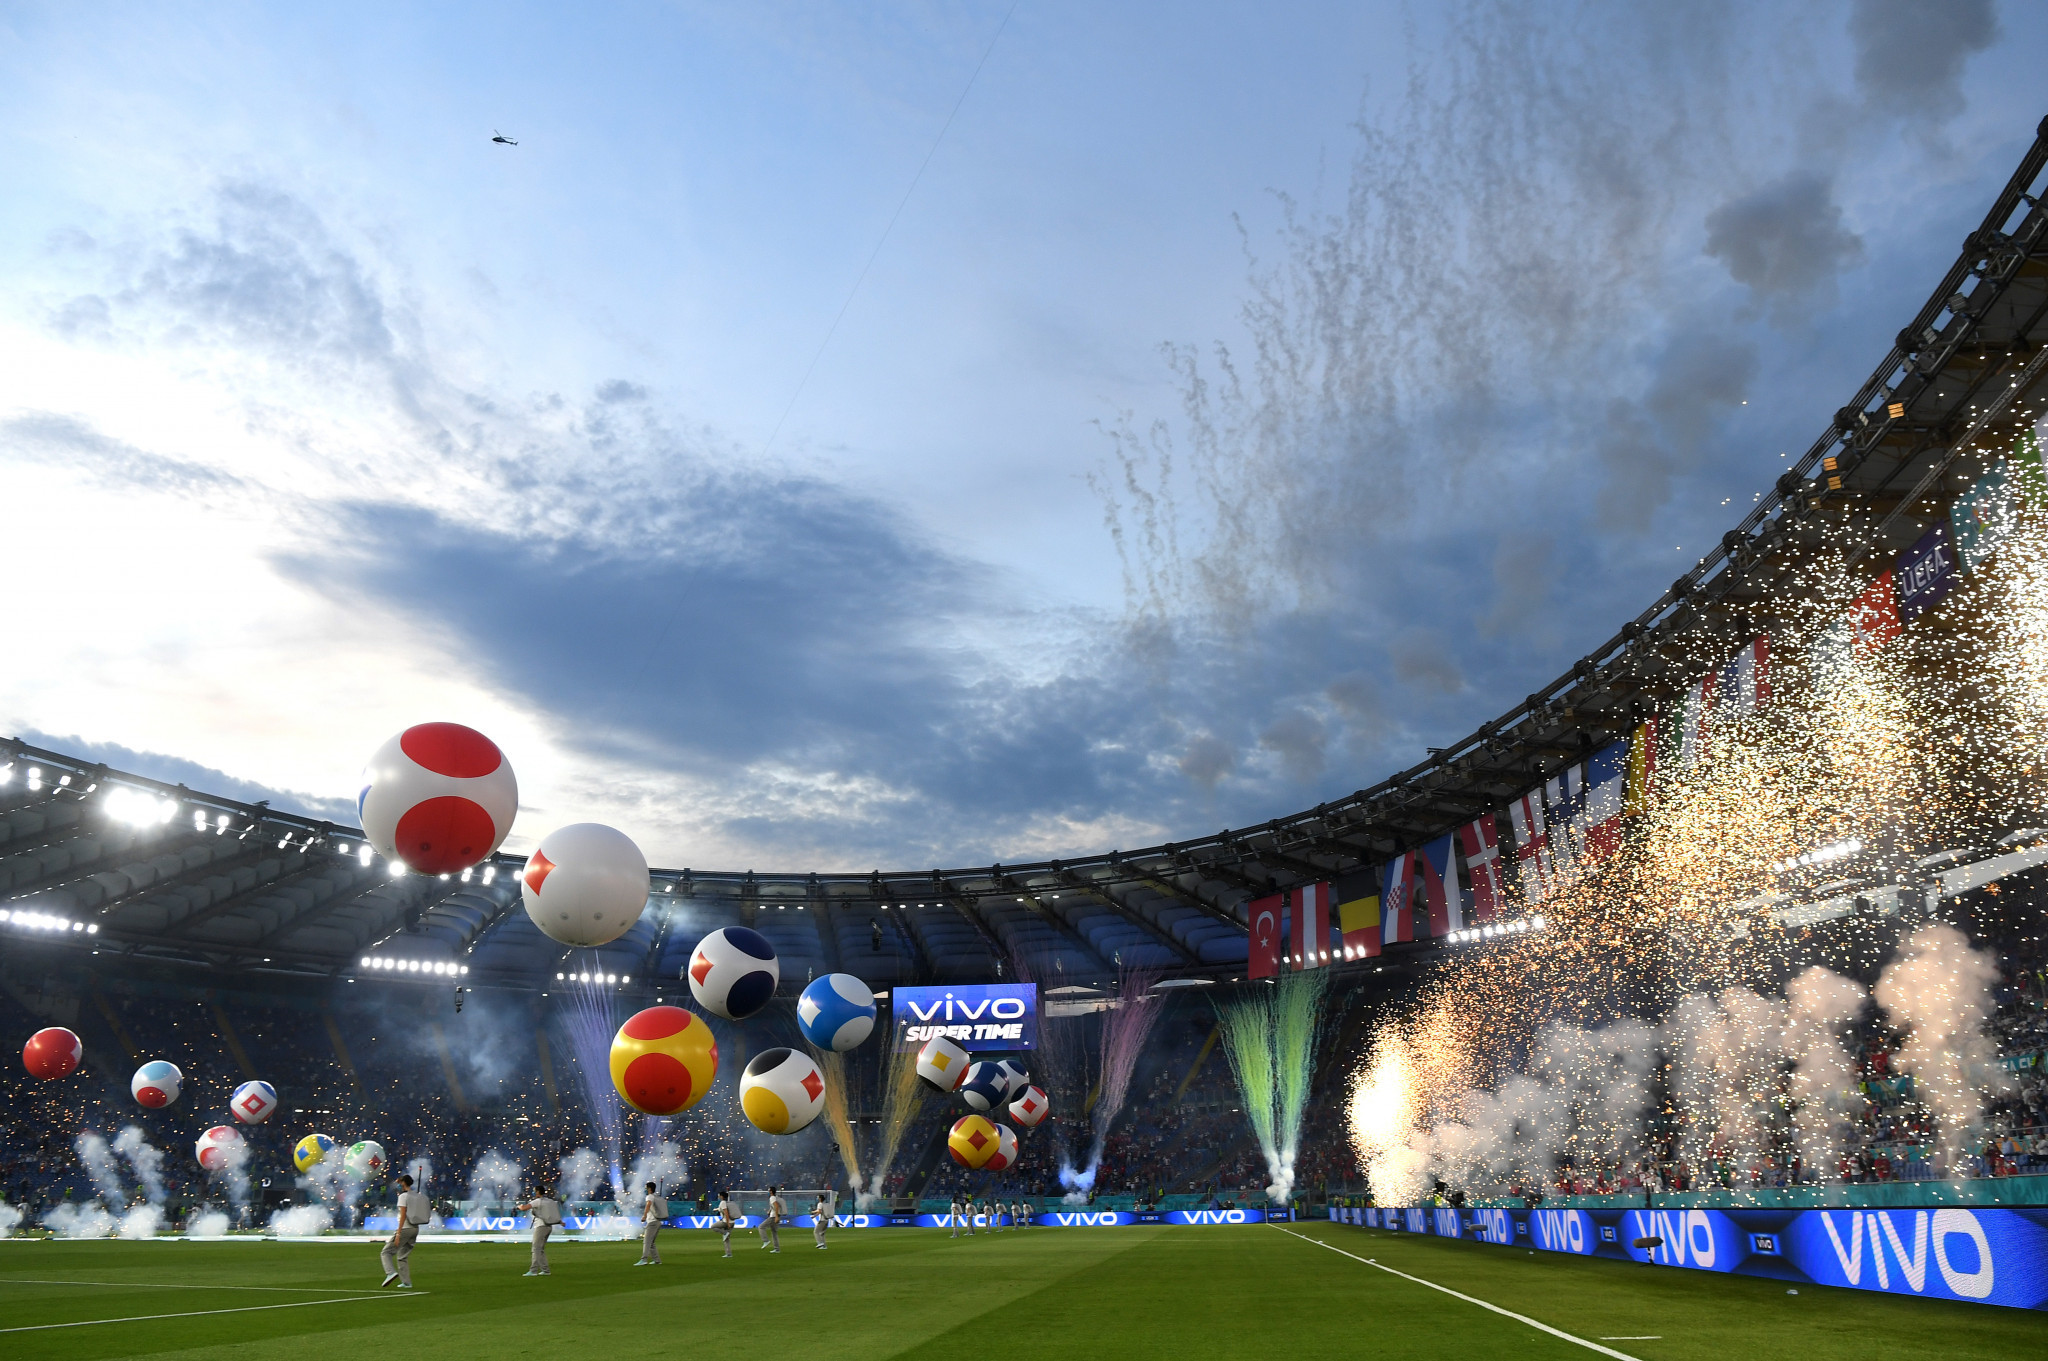 The Stadio Olimpico in Rome staged the first match of UEFA Euro 2020 last year ©Getty Images